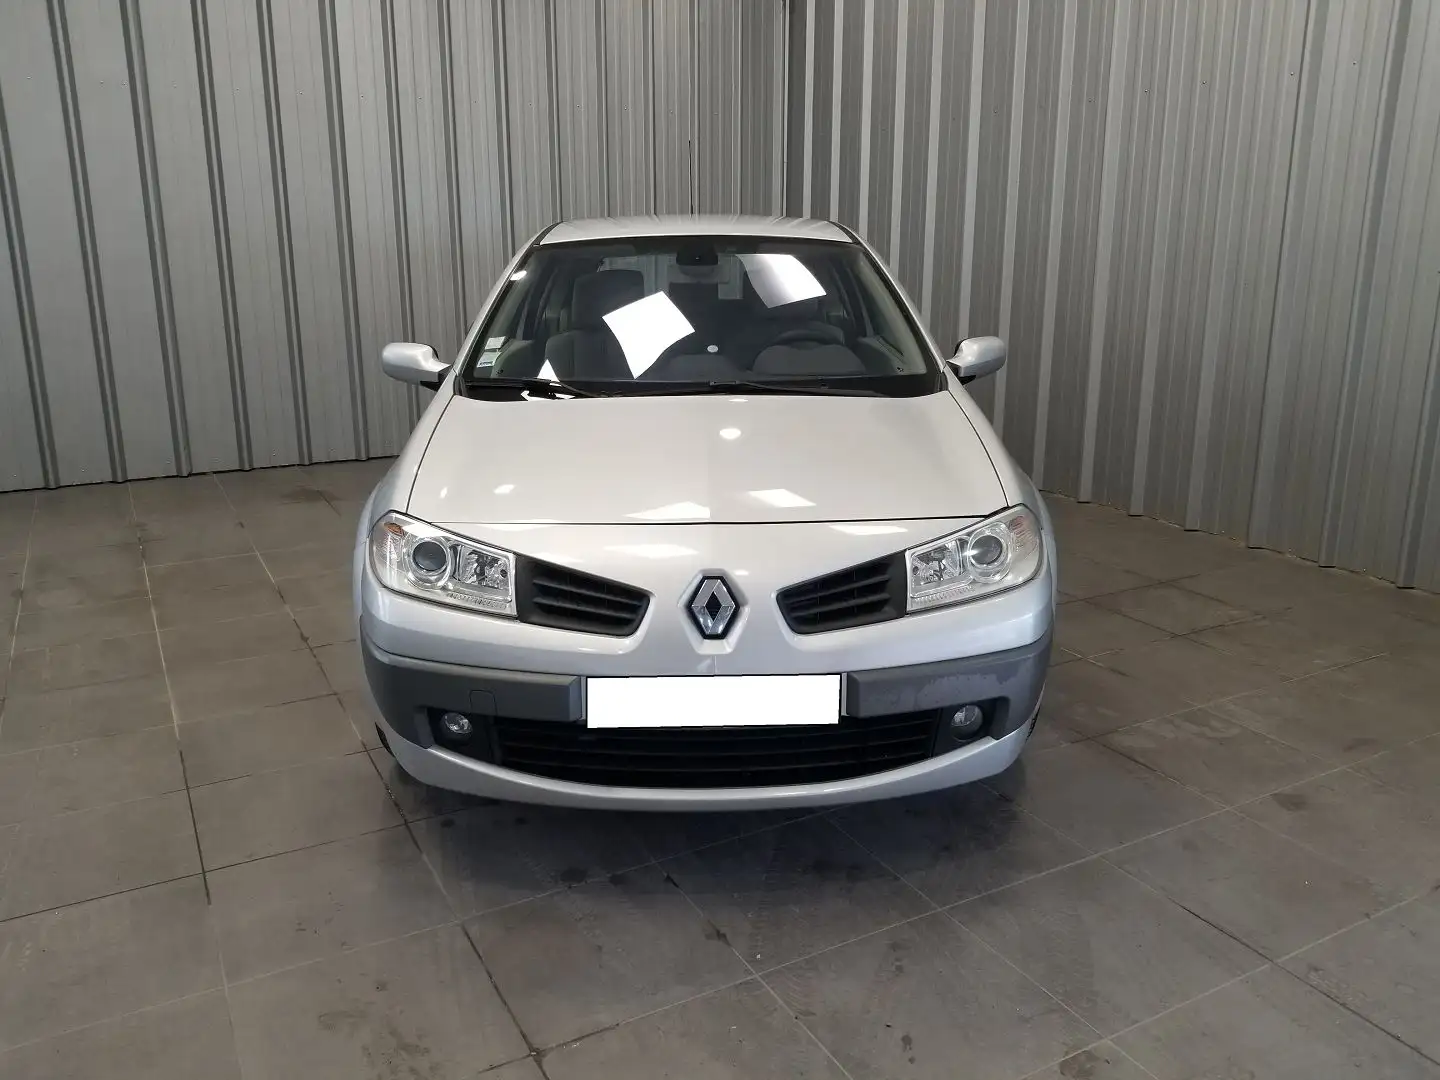 Renault Megane 1.5 DCI 85CH EXPRESSION ECO² - 2